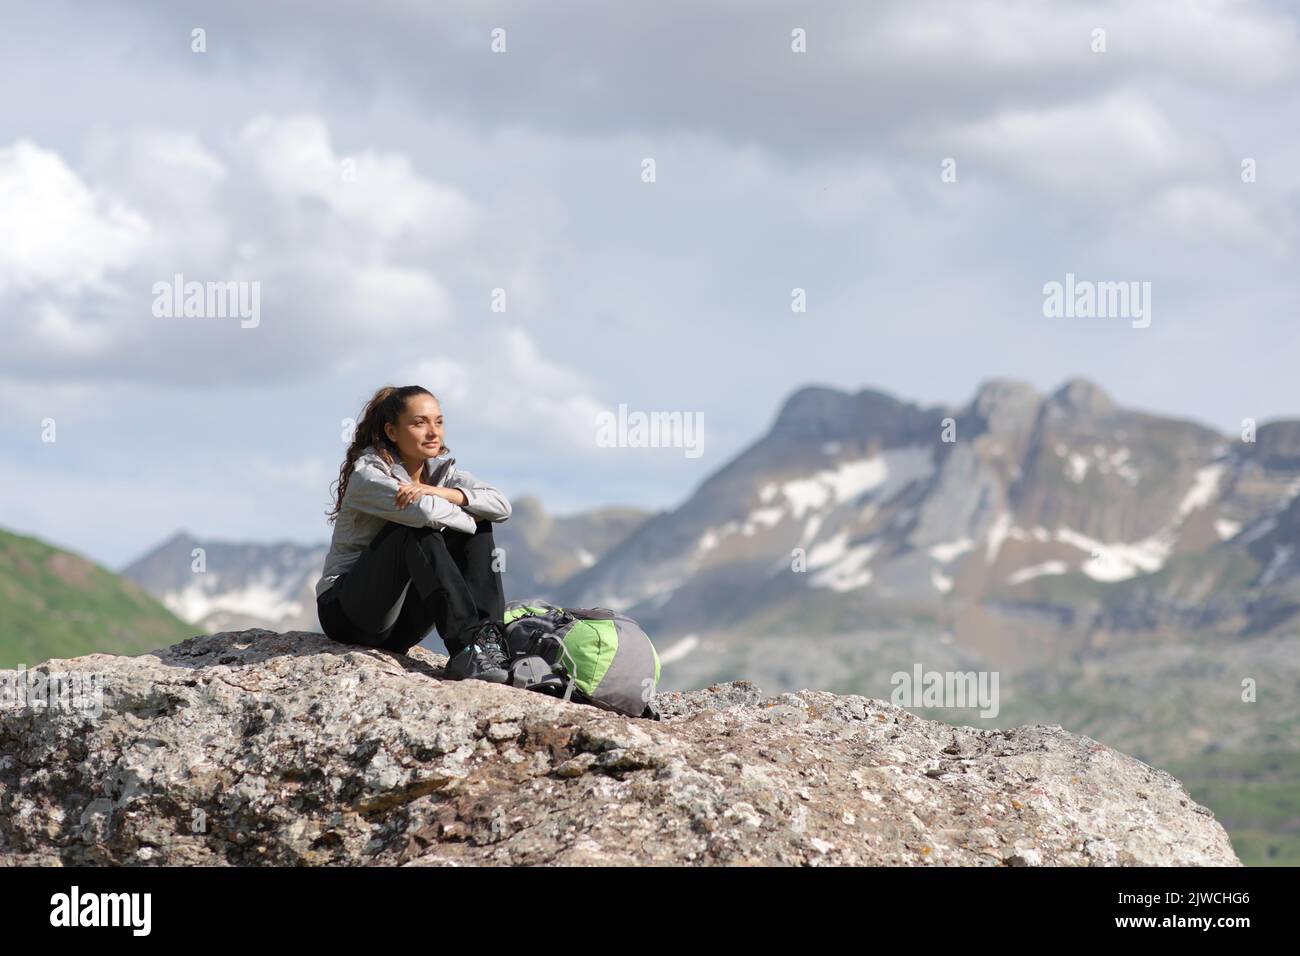 Hiker in the top of a mountain contemplating views sitting on a rock Stock Photo